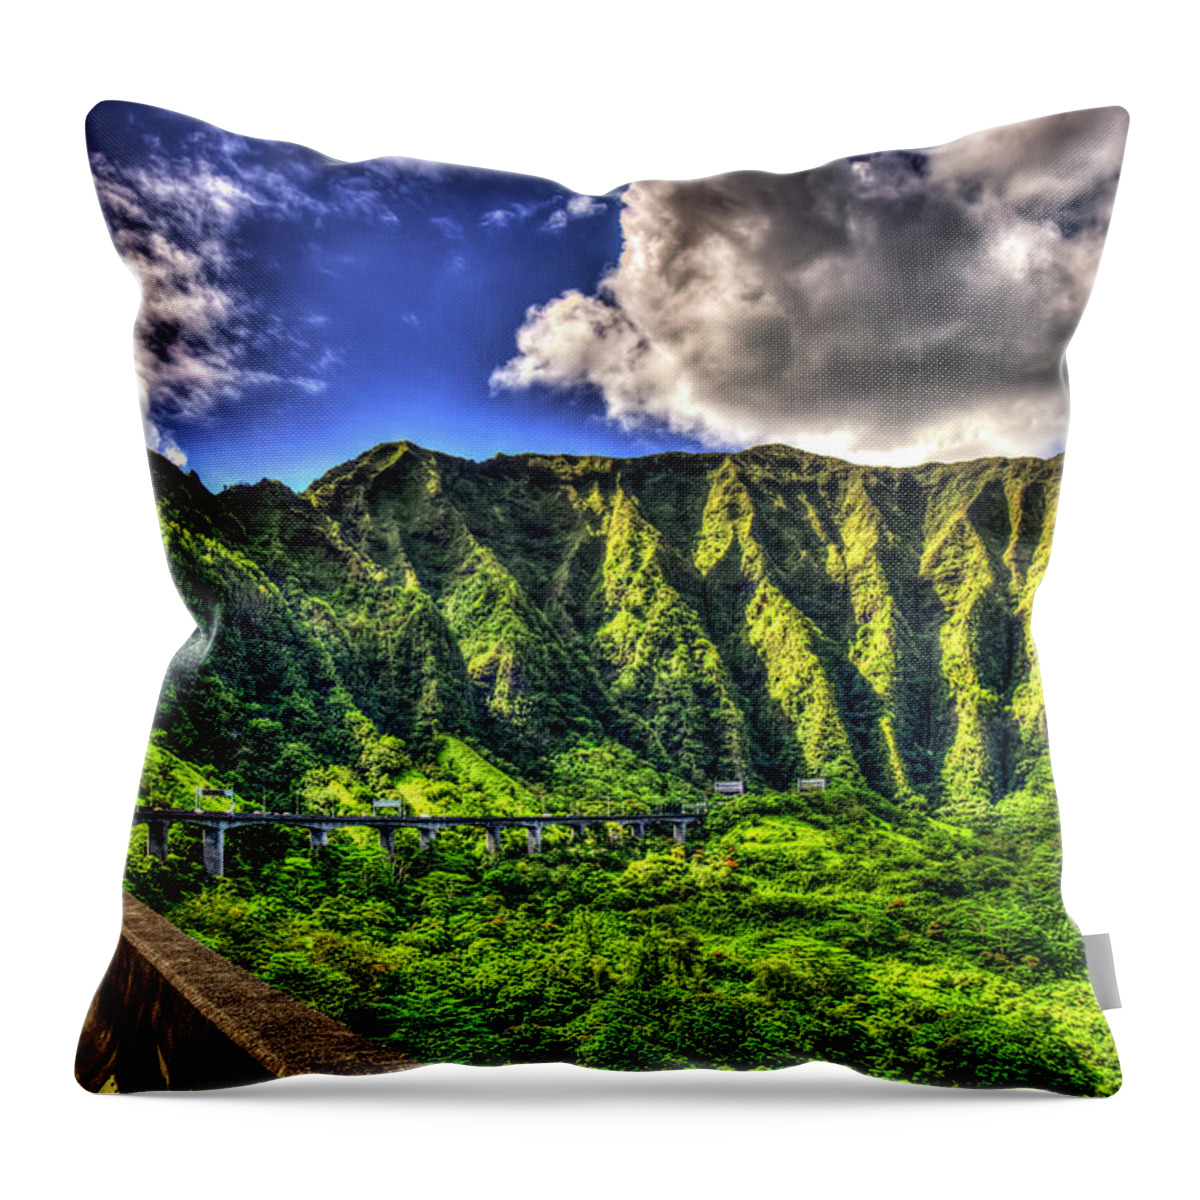 Reid Callaway Majestic Heights Images Throw Pillow featuring the photograph Majestic Heights Tetsuo Harano Tunnels Ko'oalu Mountain Range Landscape Art by Reid Callaway